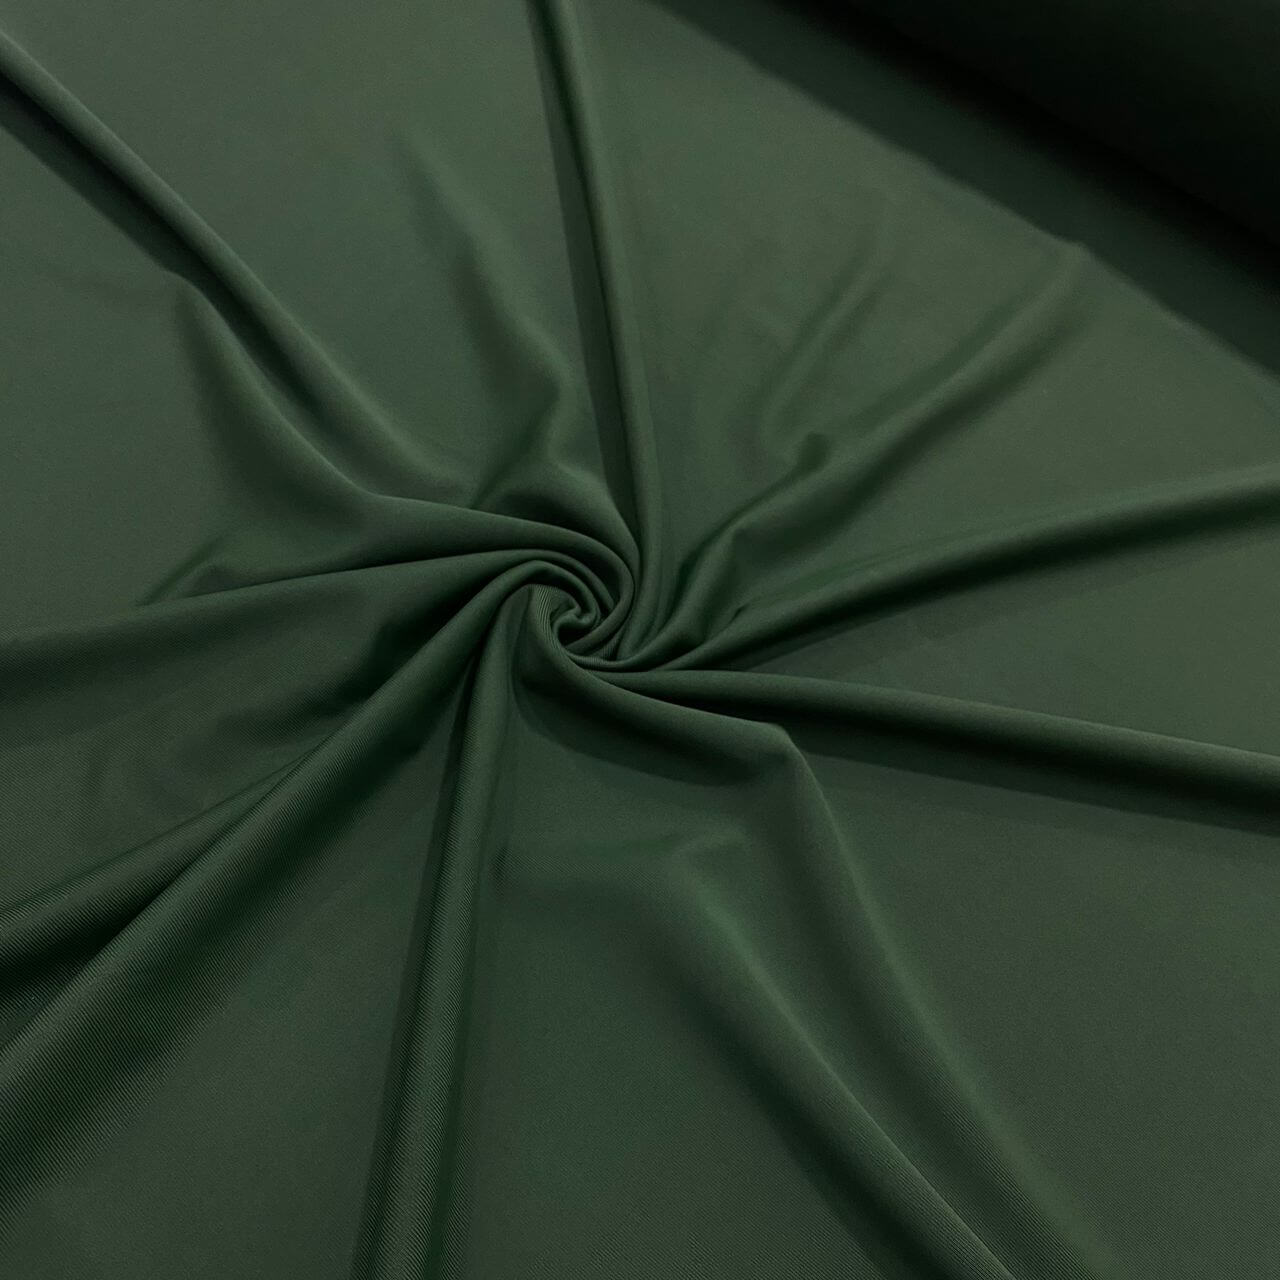 ♻️Poly Recycle Solid Army Green Matte Finish Polyester Spandex Fabric 4 Way  Stretch By Yard (243-10)